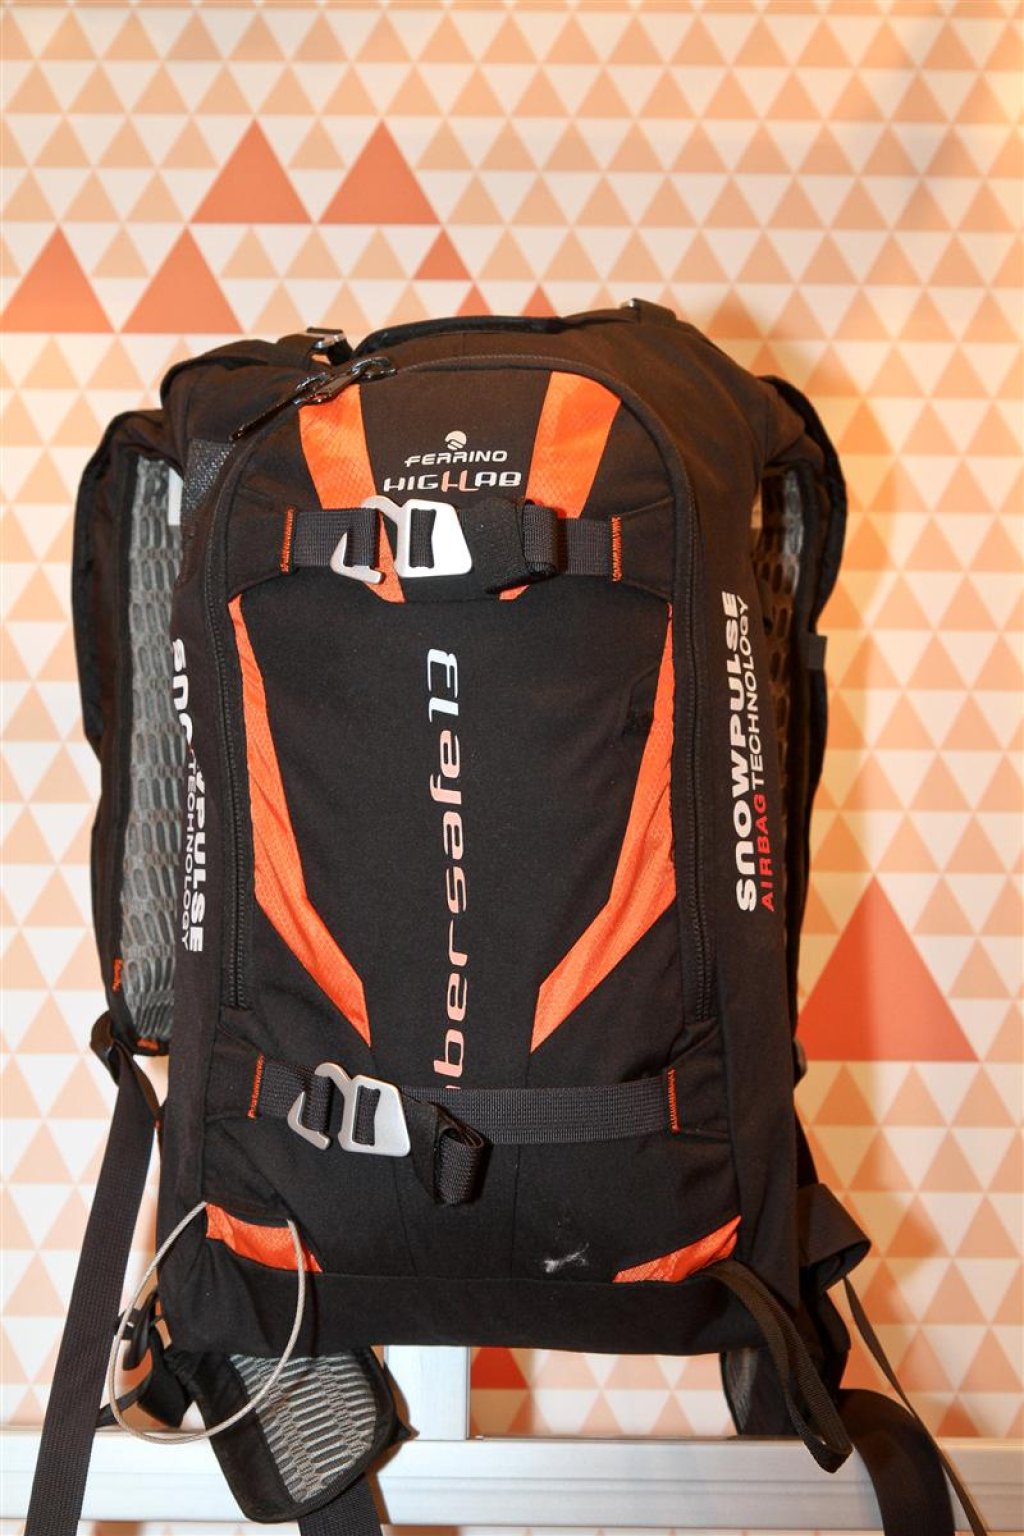 Ferrino is the only third-party manufacturer to offer a backpack with the Mammut Lifebag System